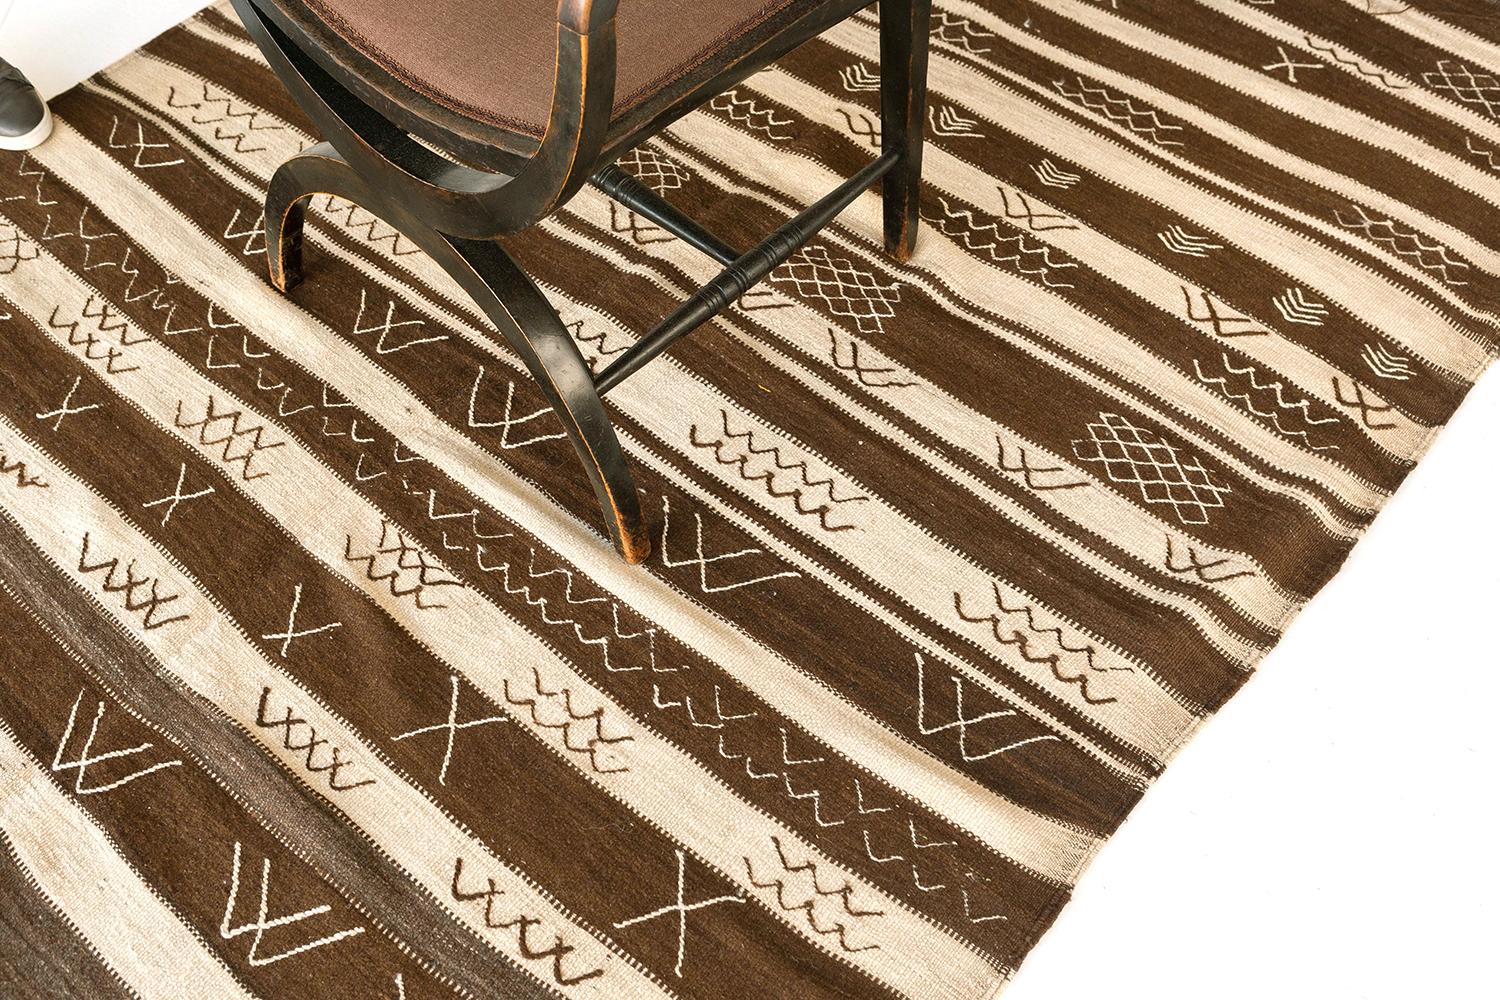 This stunning hand-spun flat woven wool of High Atlas Moroccan rug vividly features the waves, lozenges, and chevrons in neutral palettes. Unique horizontal patterns are perfectly matched with the Berber symbols. A great choice for your boho chic